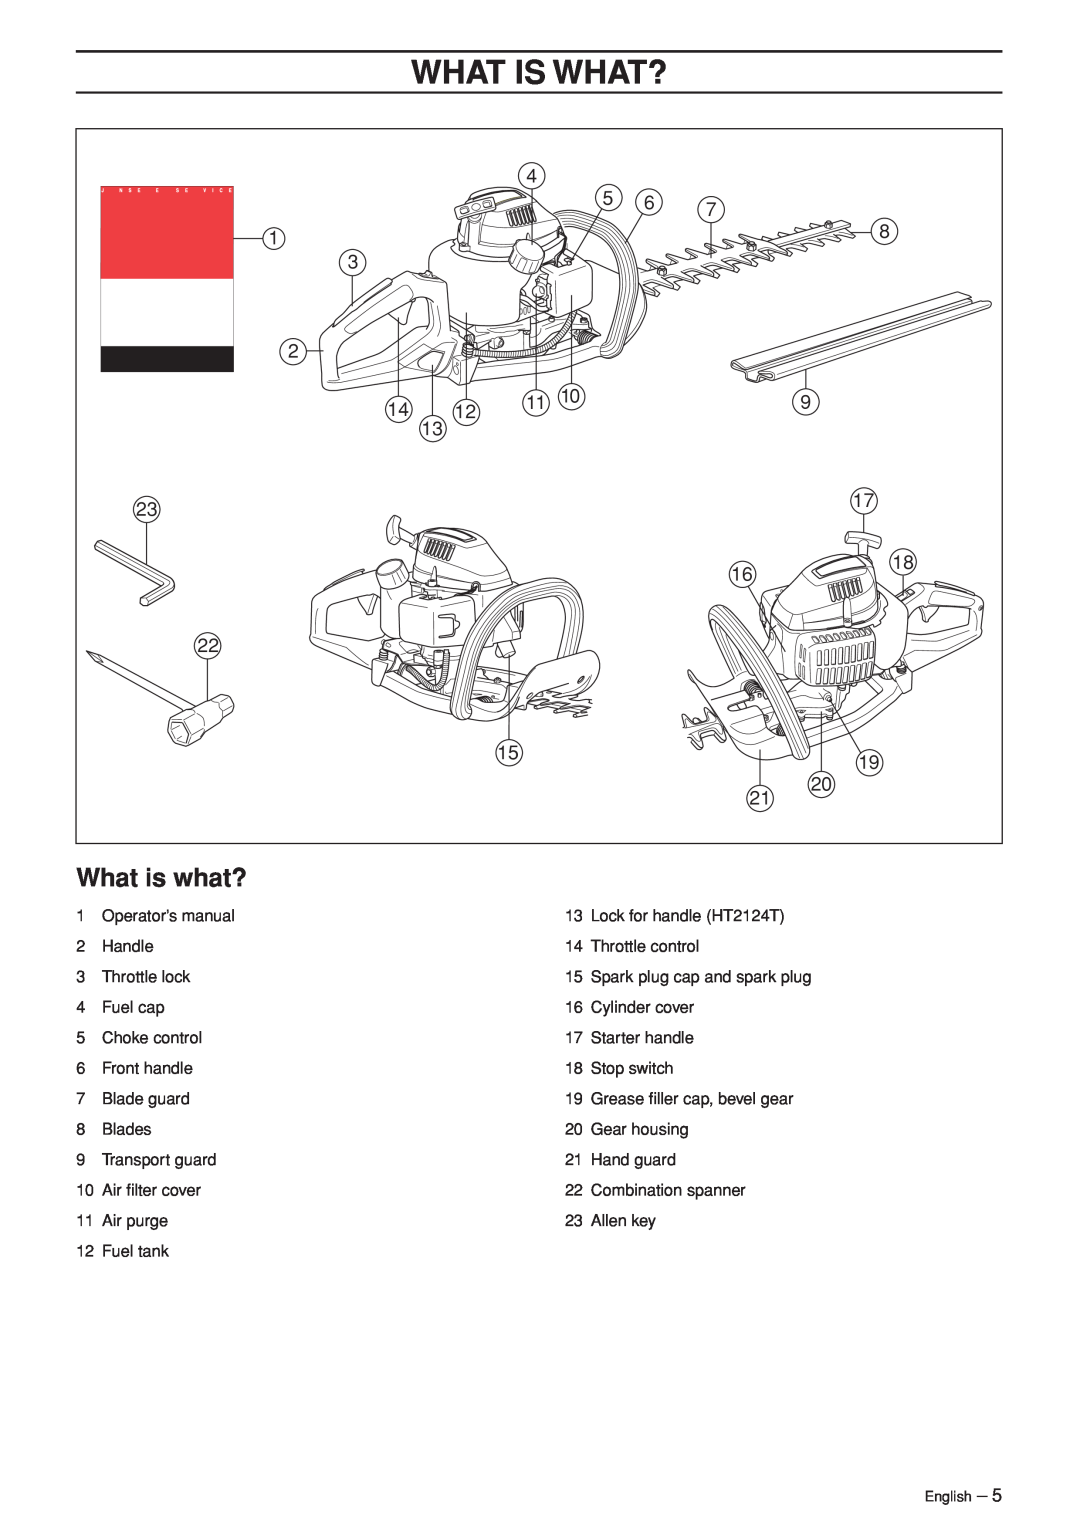 Jonsered HT 2124T manual What Is What?, What is what? 